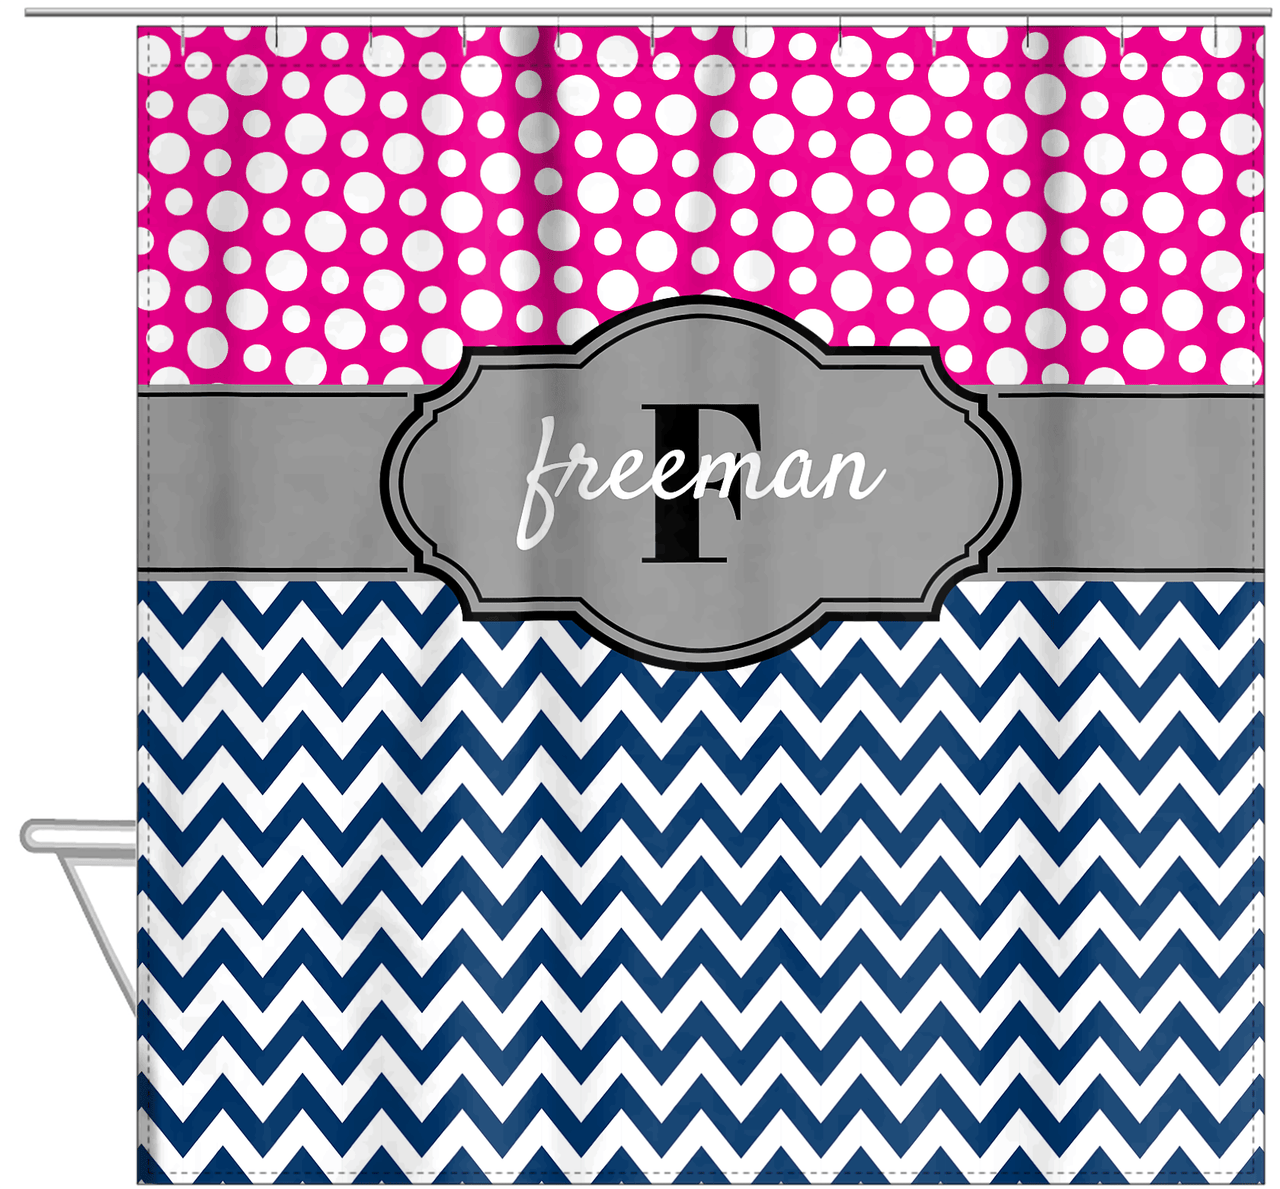 Personalized Polka Dots and Chevron I Shower Curtain - Pink and Navy - Fancy Nameplate - Hanging View